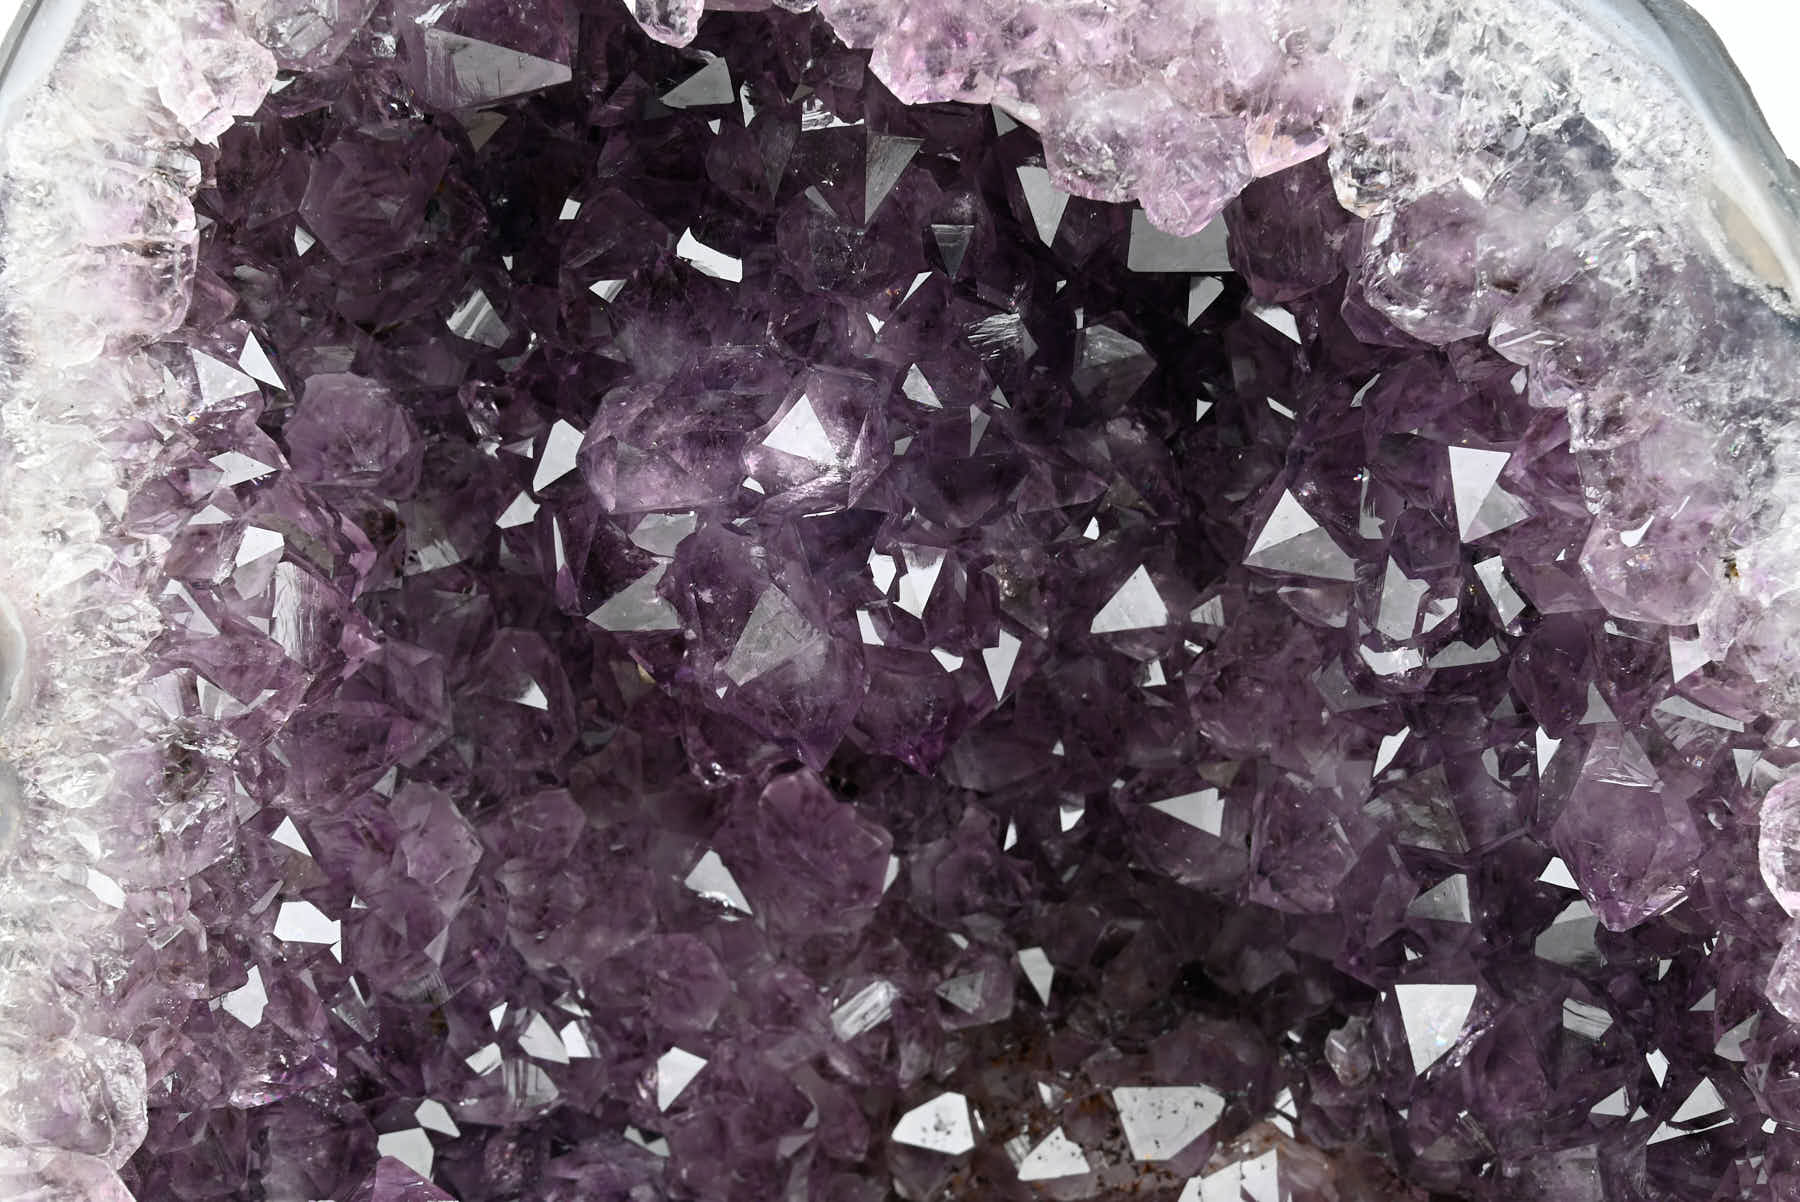 Extra Quality Amethyst Cathedral - 4.52kg, 20cm tall - #CAAMET-10022